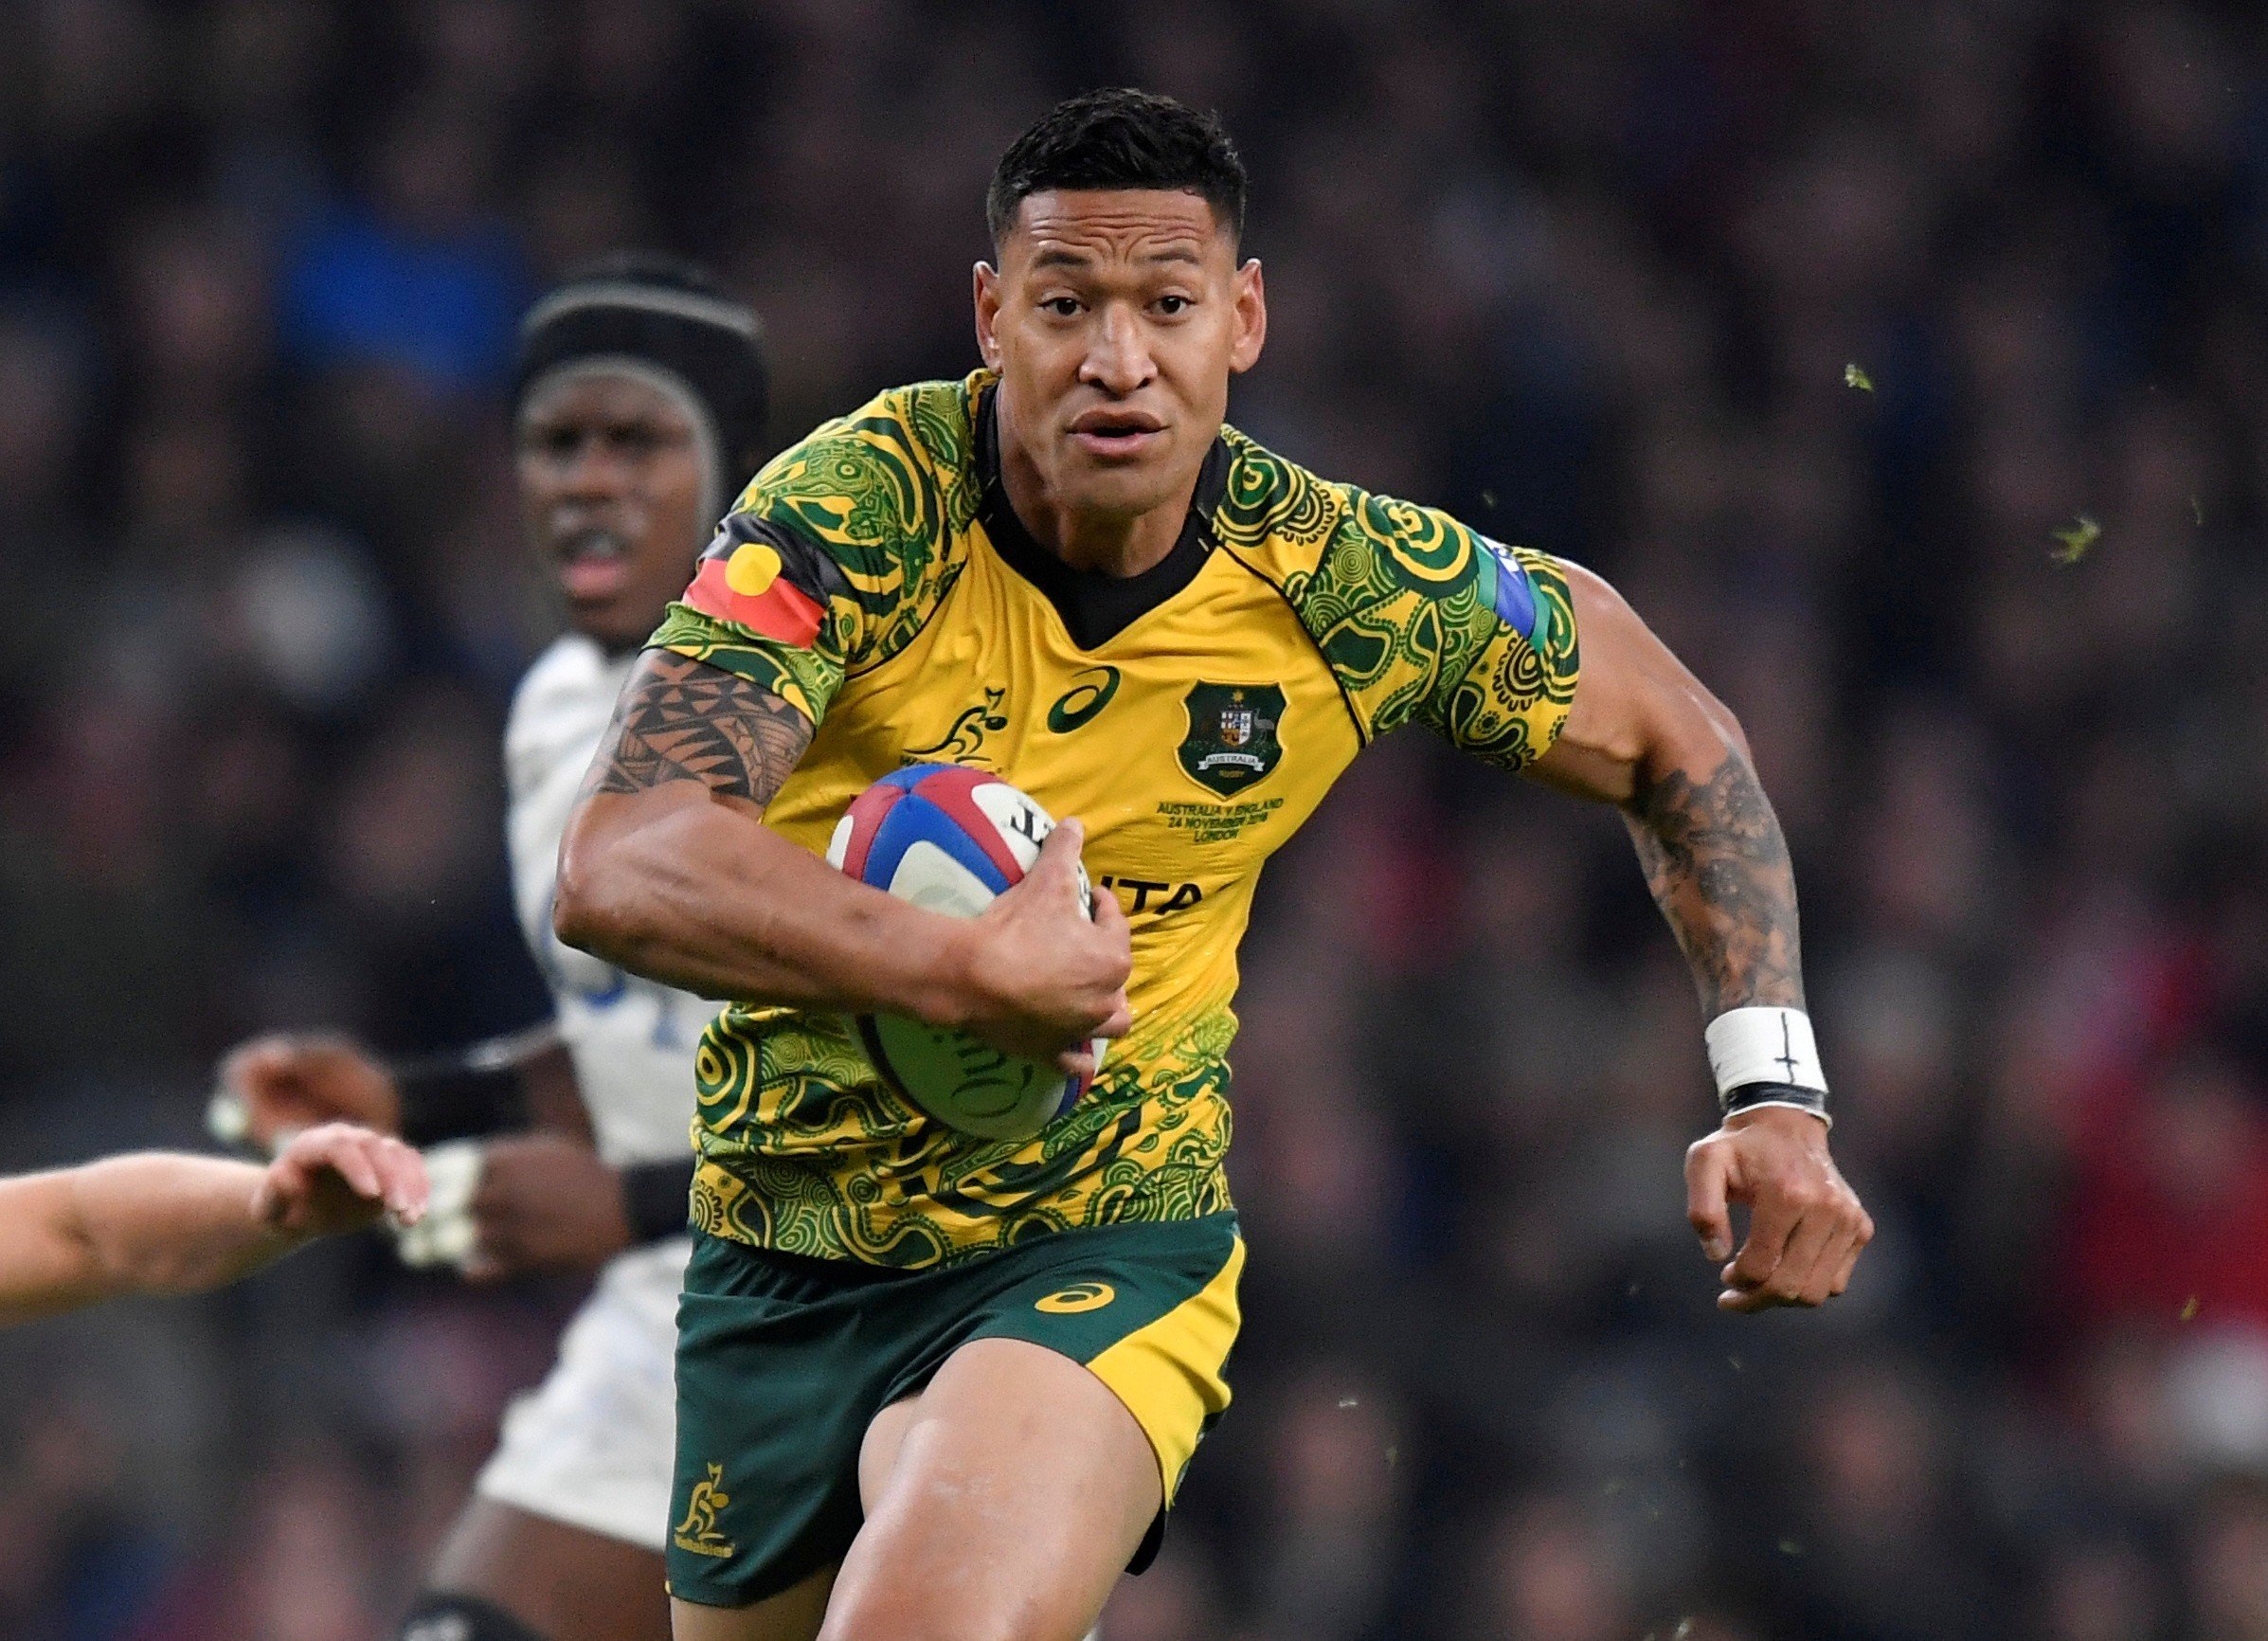 Israel Folau has settled out of court, after threatening to sue Rugby Australia for dismissing him for his religious beliefs. Photo: Reuters